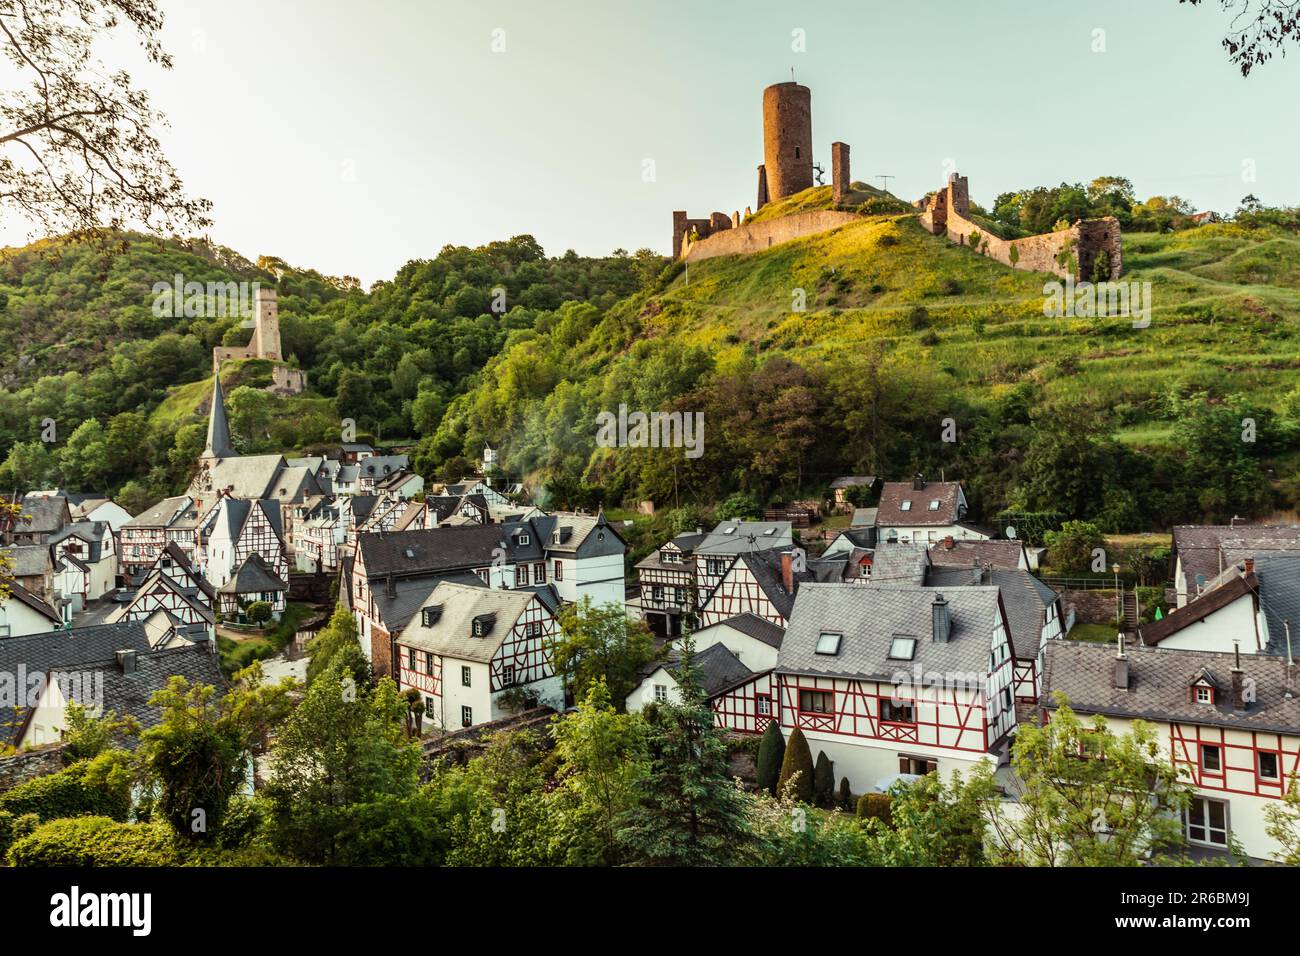 Landscape of the picturesque city Monreal in the Eifel Germany Stock Photo